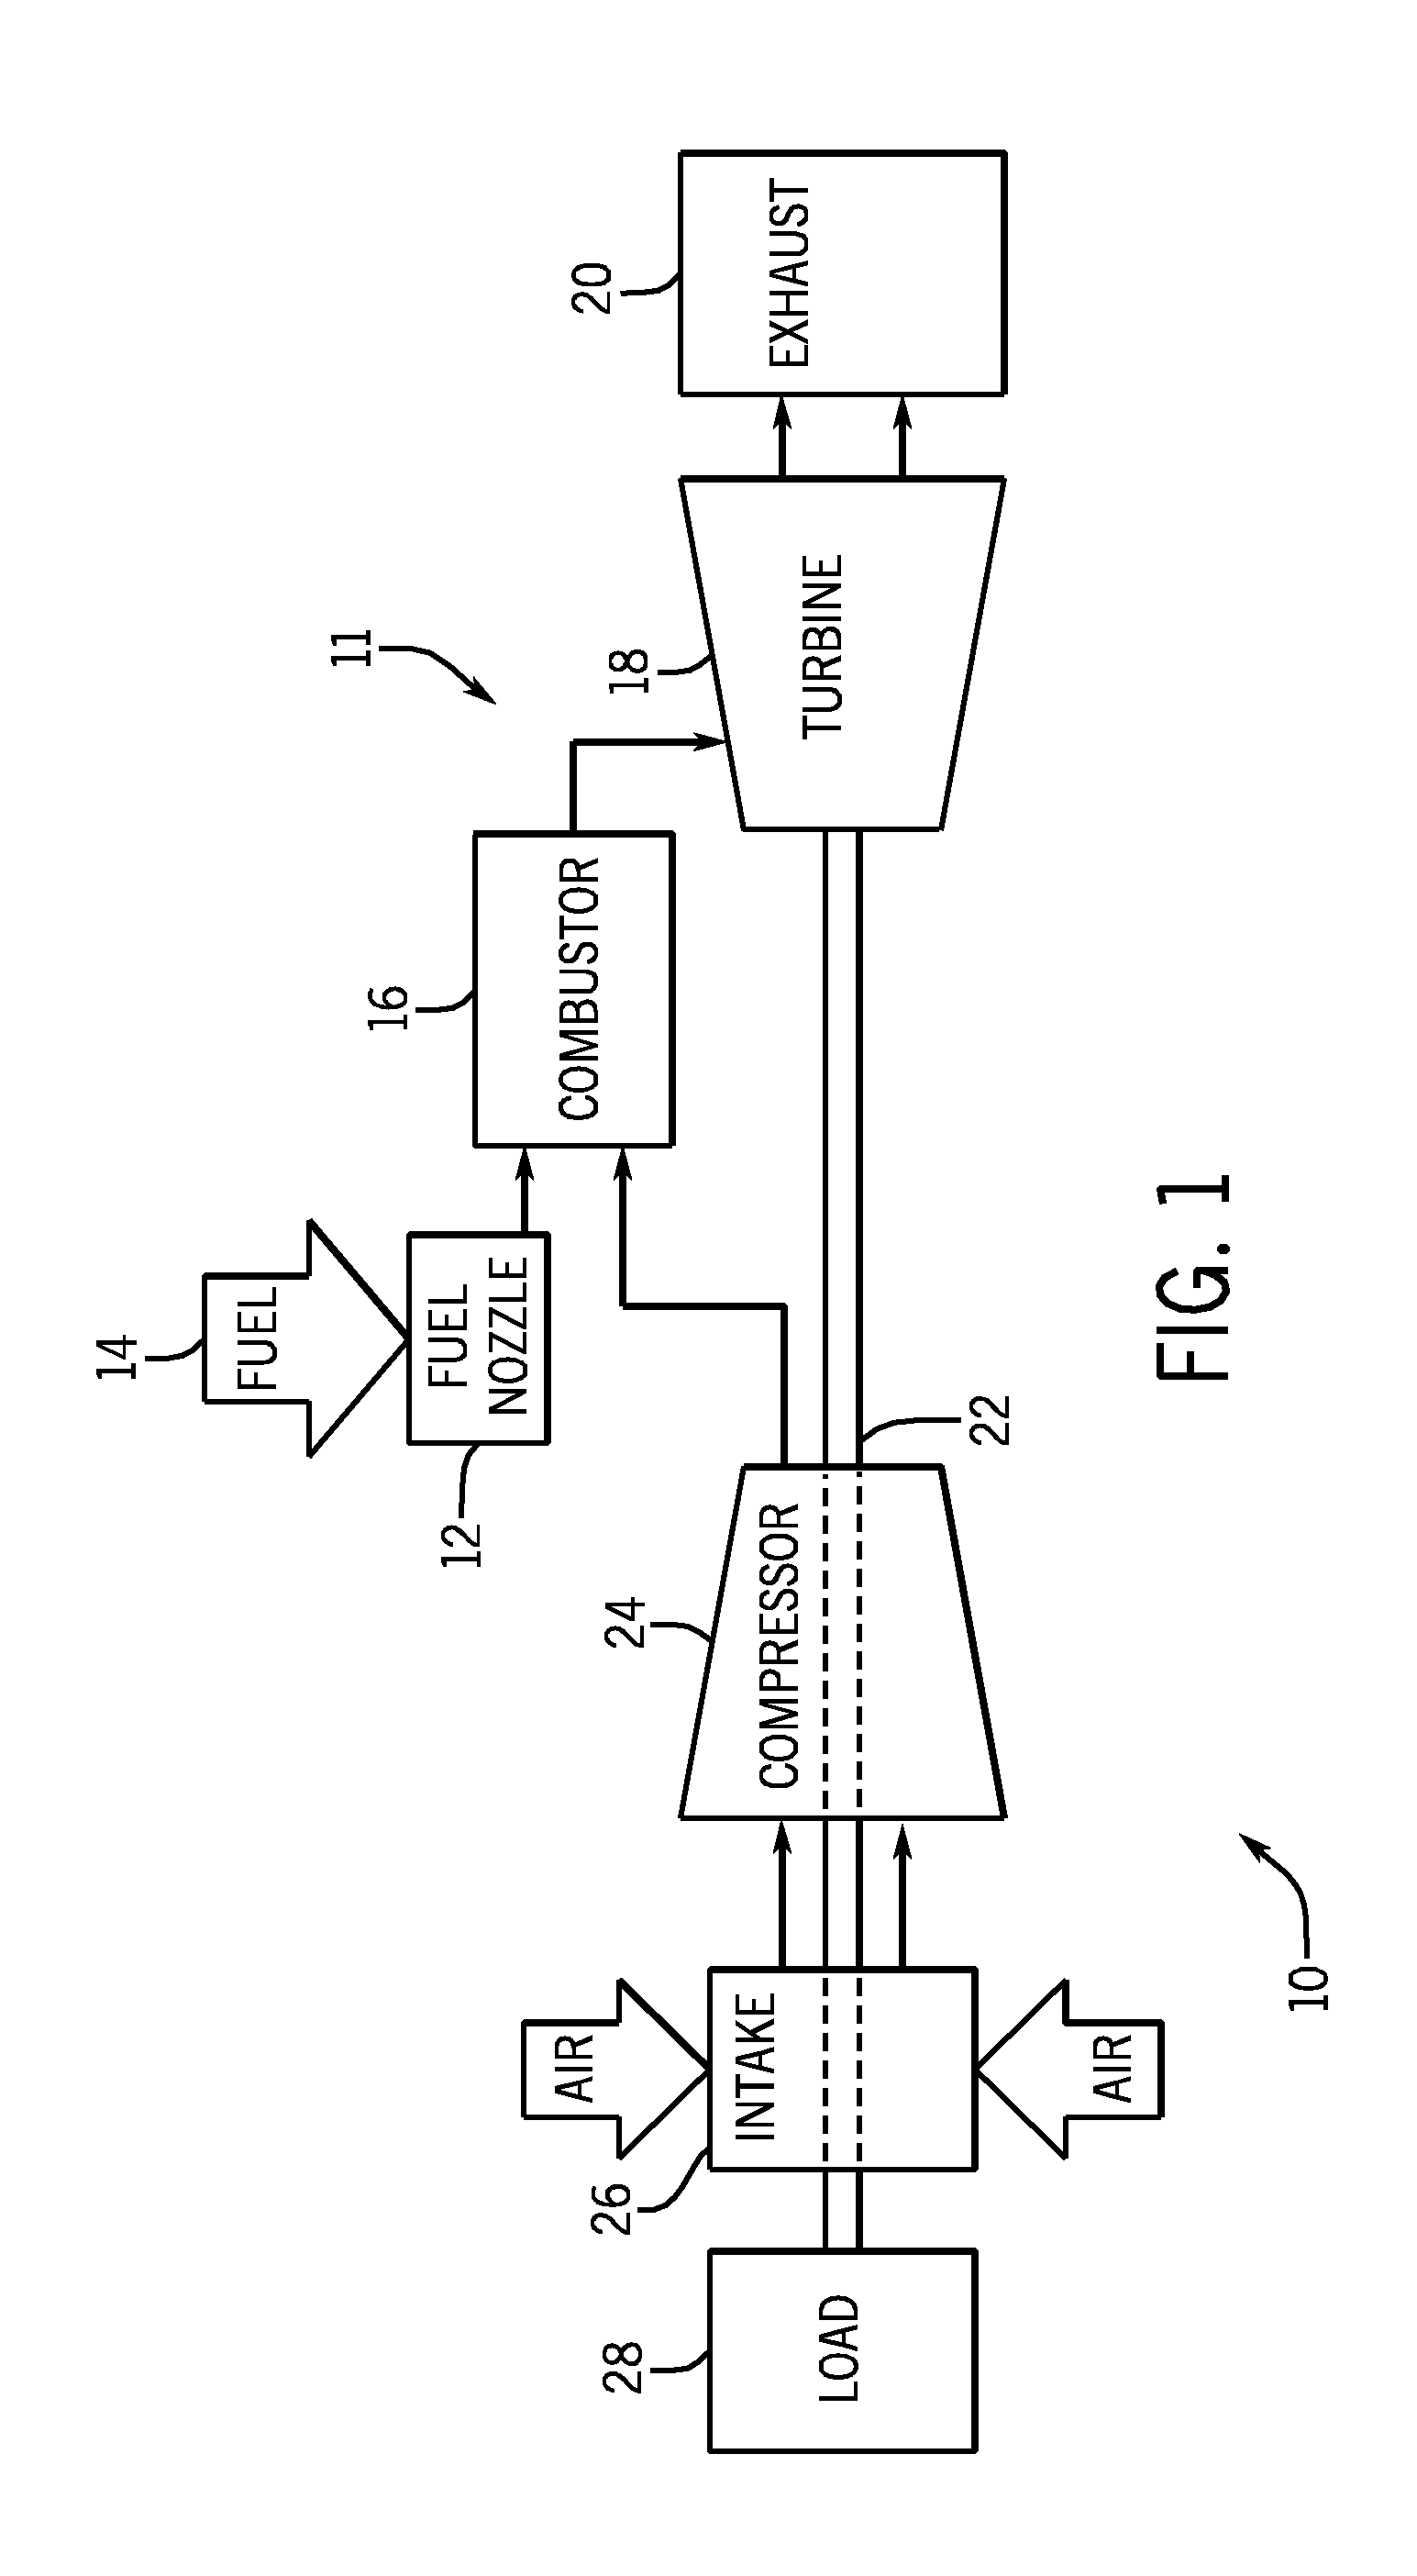 System and method for flow control in gas turbine engine